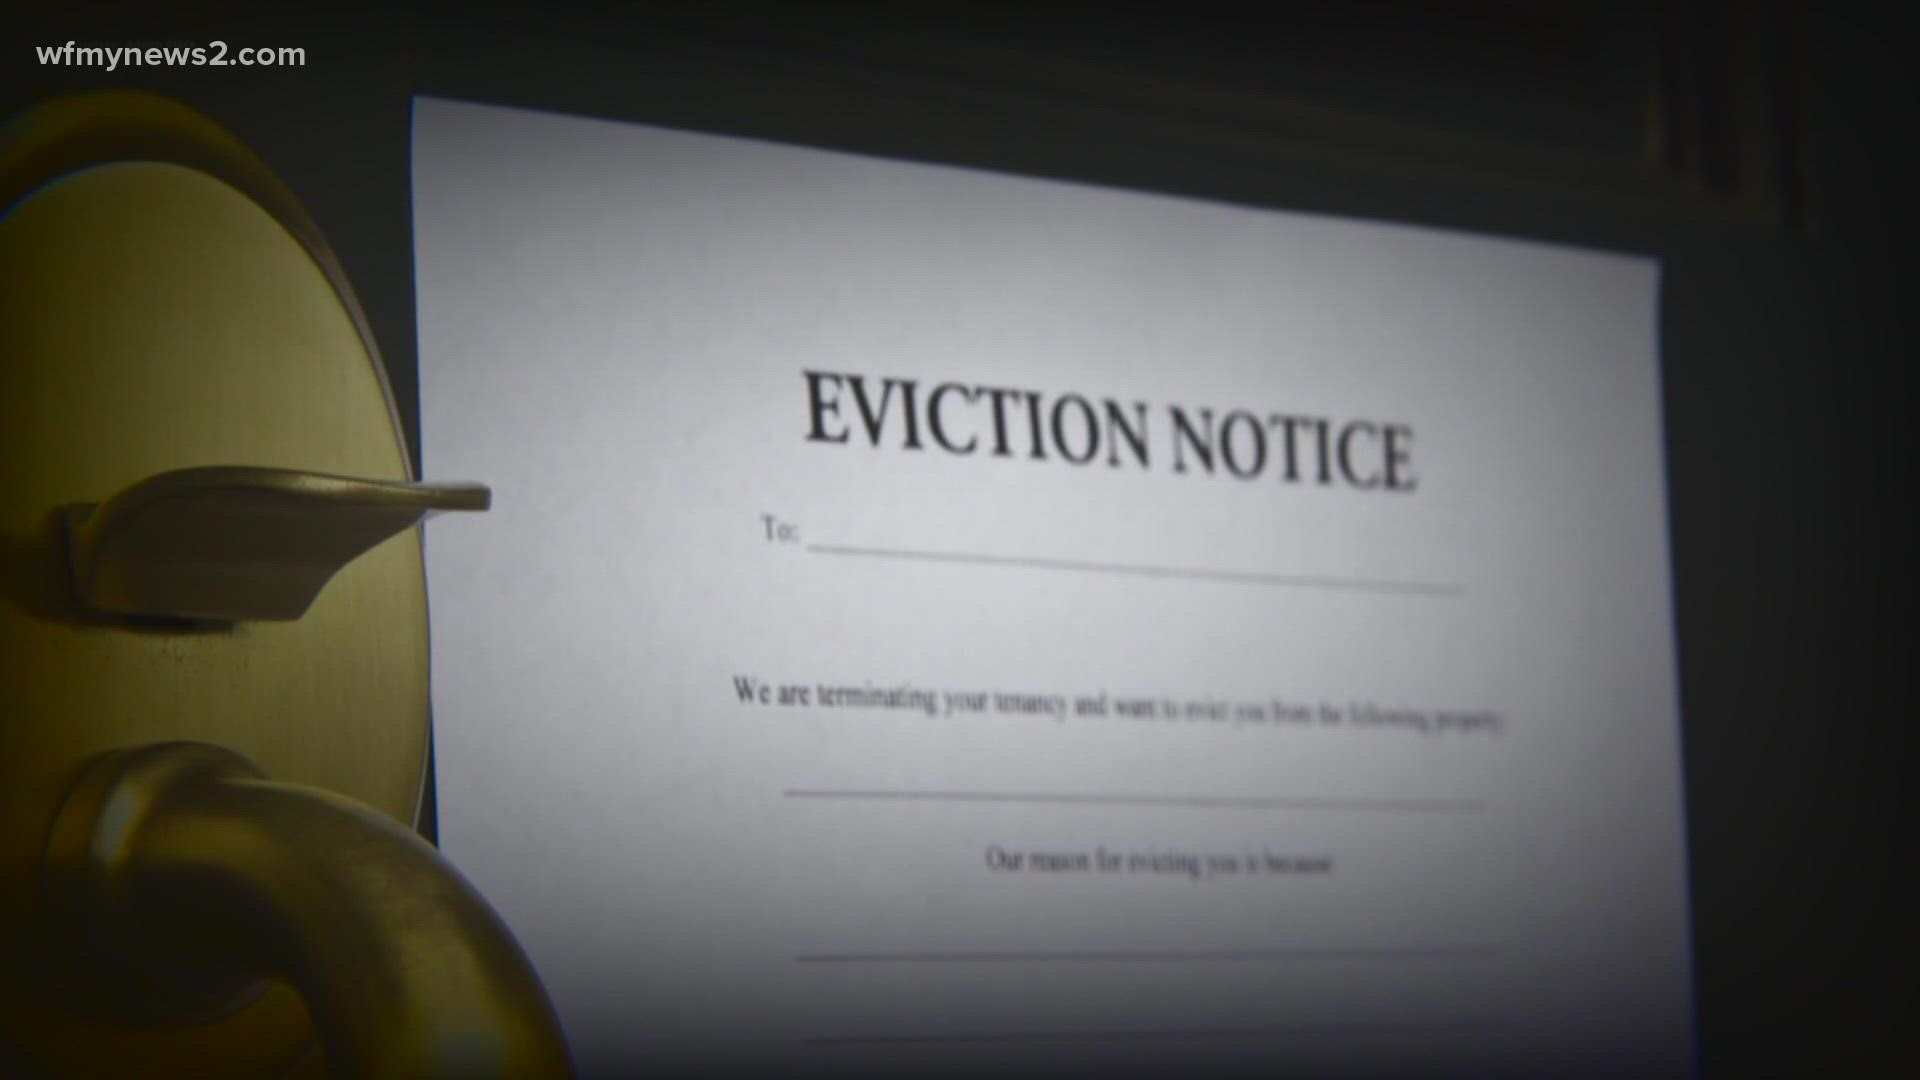 Everything you need to know about the CDC's new eviction moratorium, which expires Oct. 3